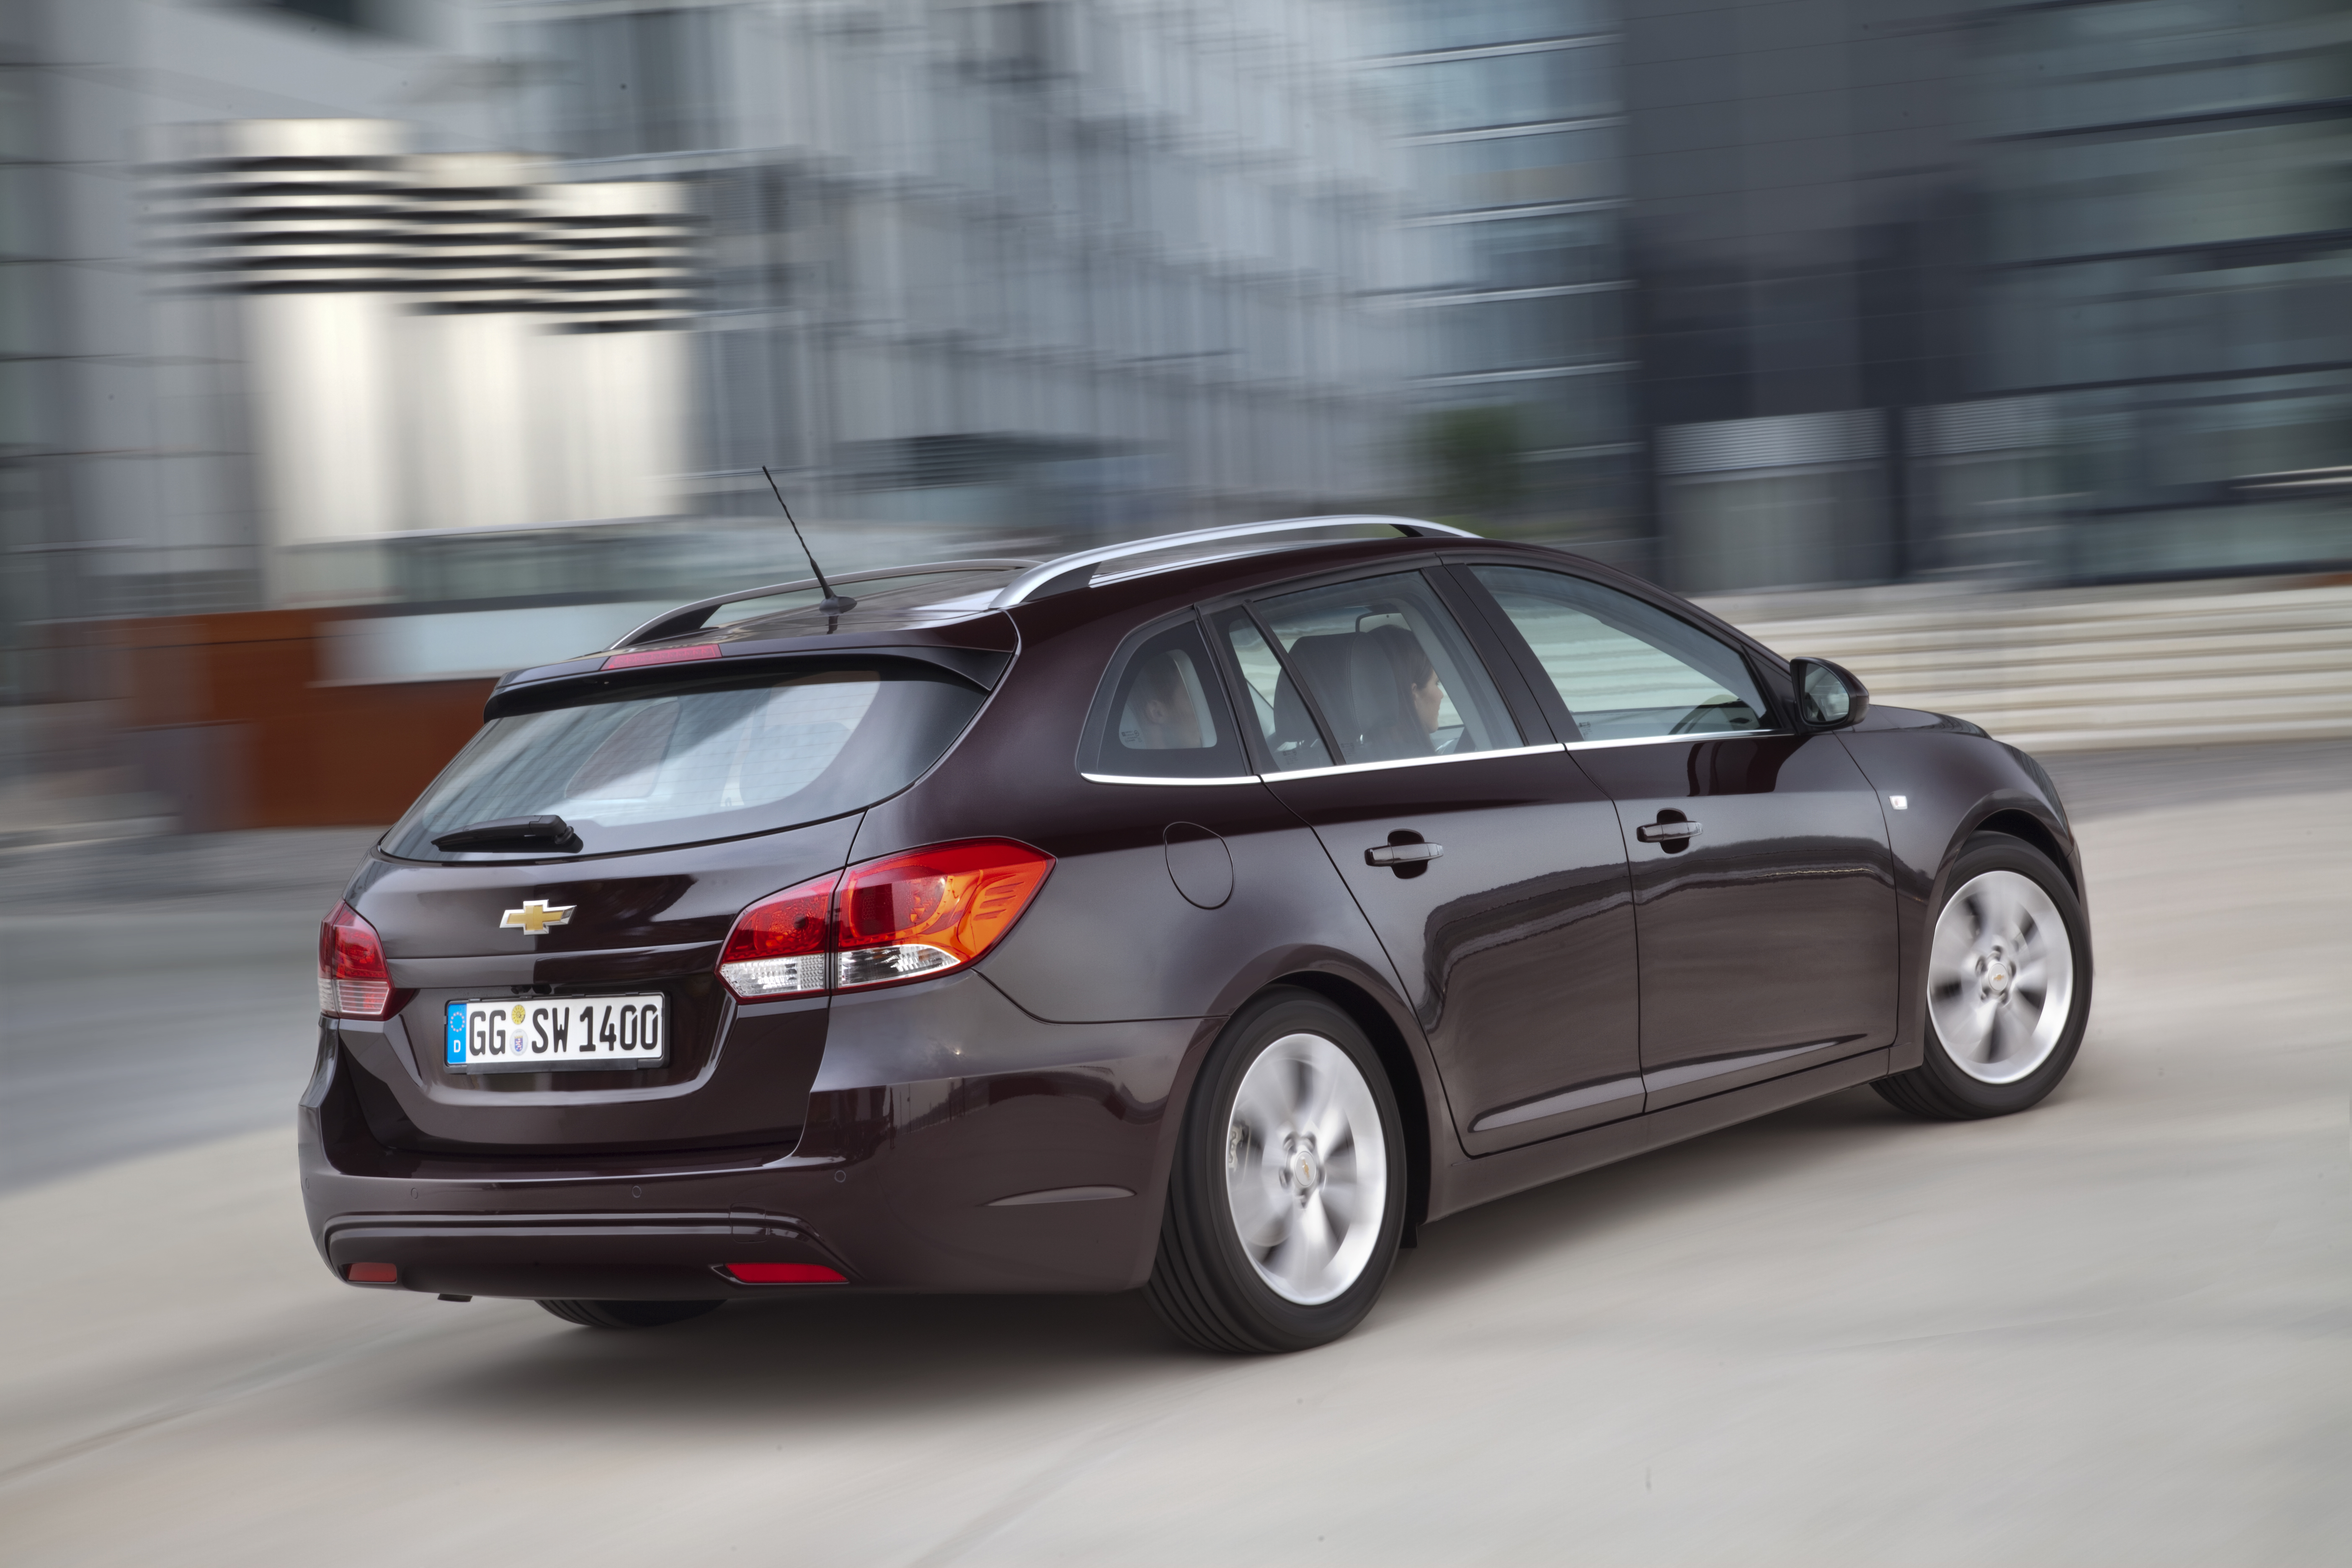 Chevrolet Cruze Station Wagon exterior specifications